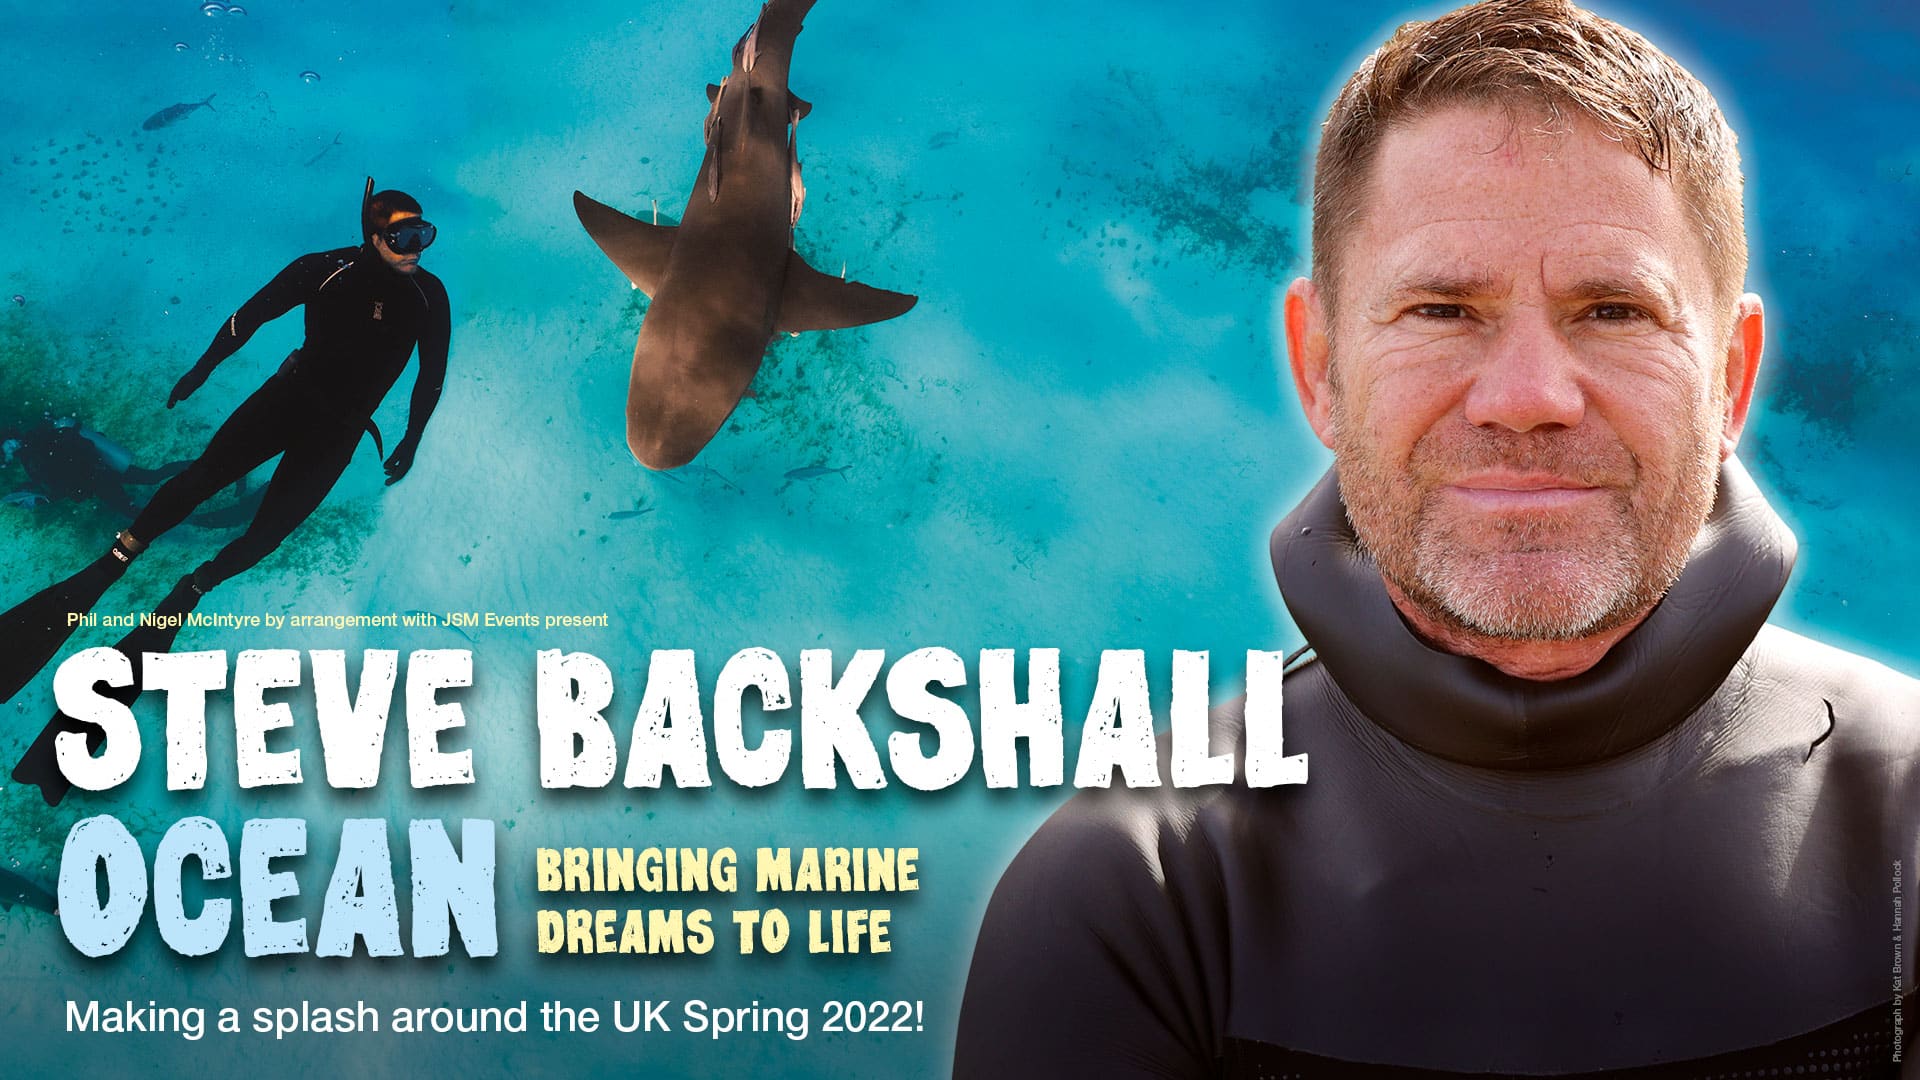 A close up of Steve Backshall. In the background, you can see a shark in the ocean and a diver swimming nearby